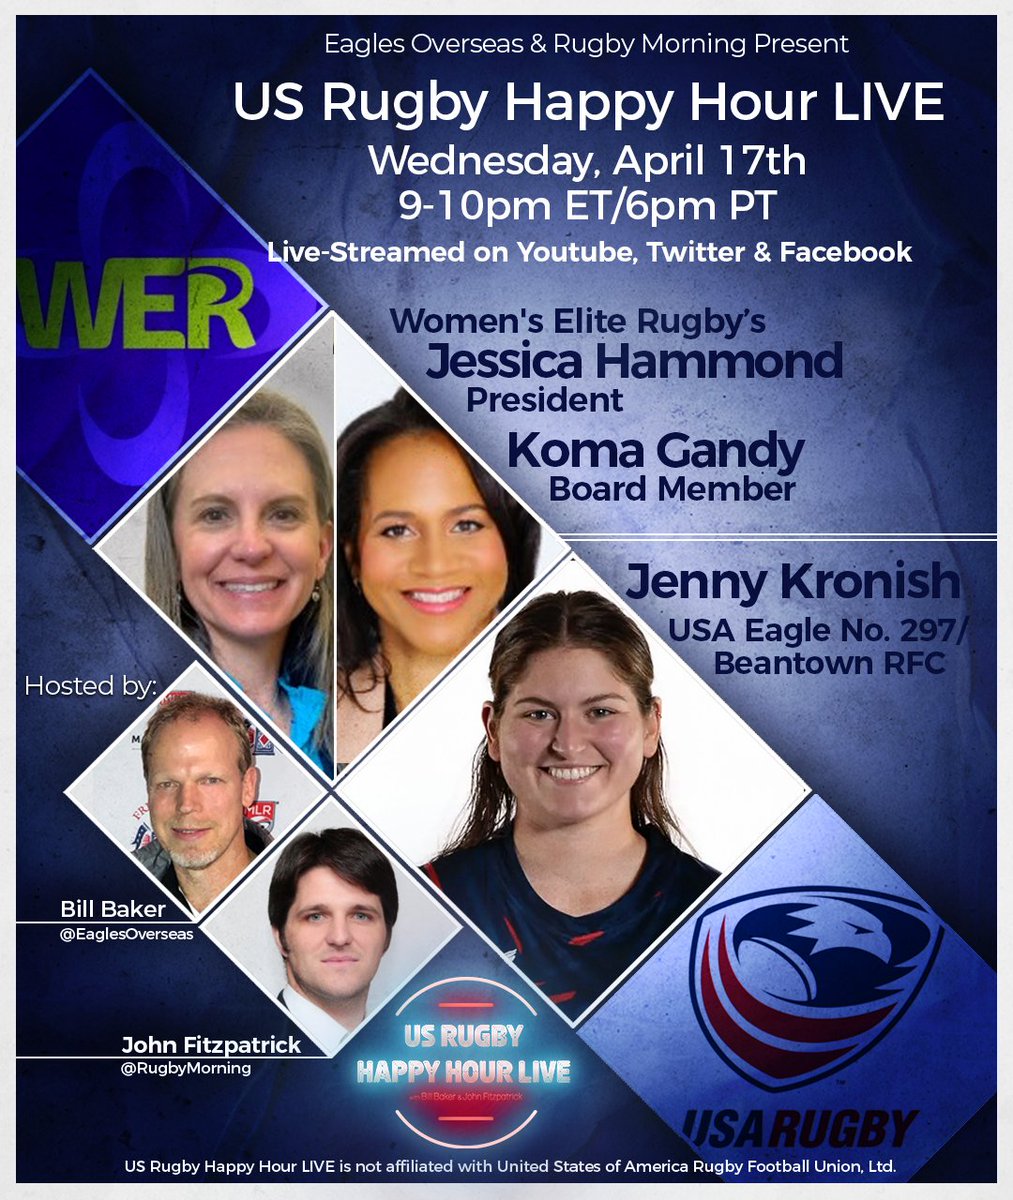 🚨 Weds on US Rugby Happy Hour LIVE, Women’s Elite Rugby is on our brains! Who better to talk to about it than WER President, Jessica Hammond & Board Member, Koma Gandy! Plus, USA Eagle & @beantownrfc’s Jenny Kronish joins to talk about what this could mean for players like her.